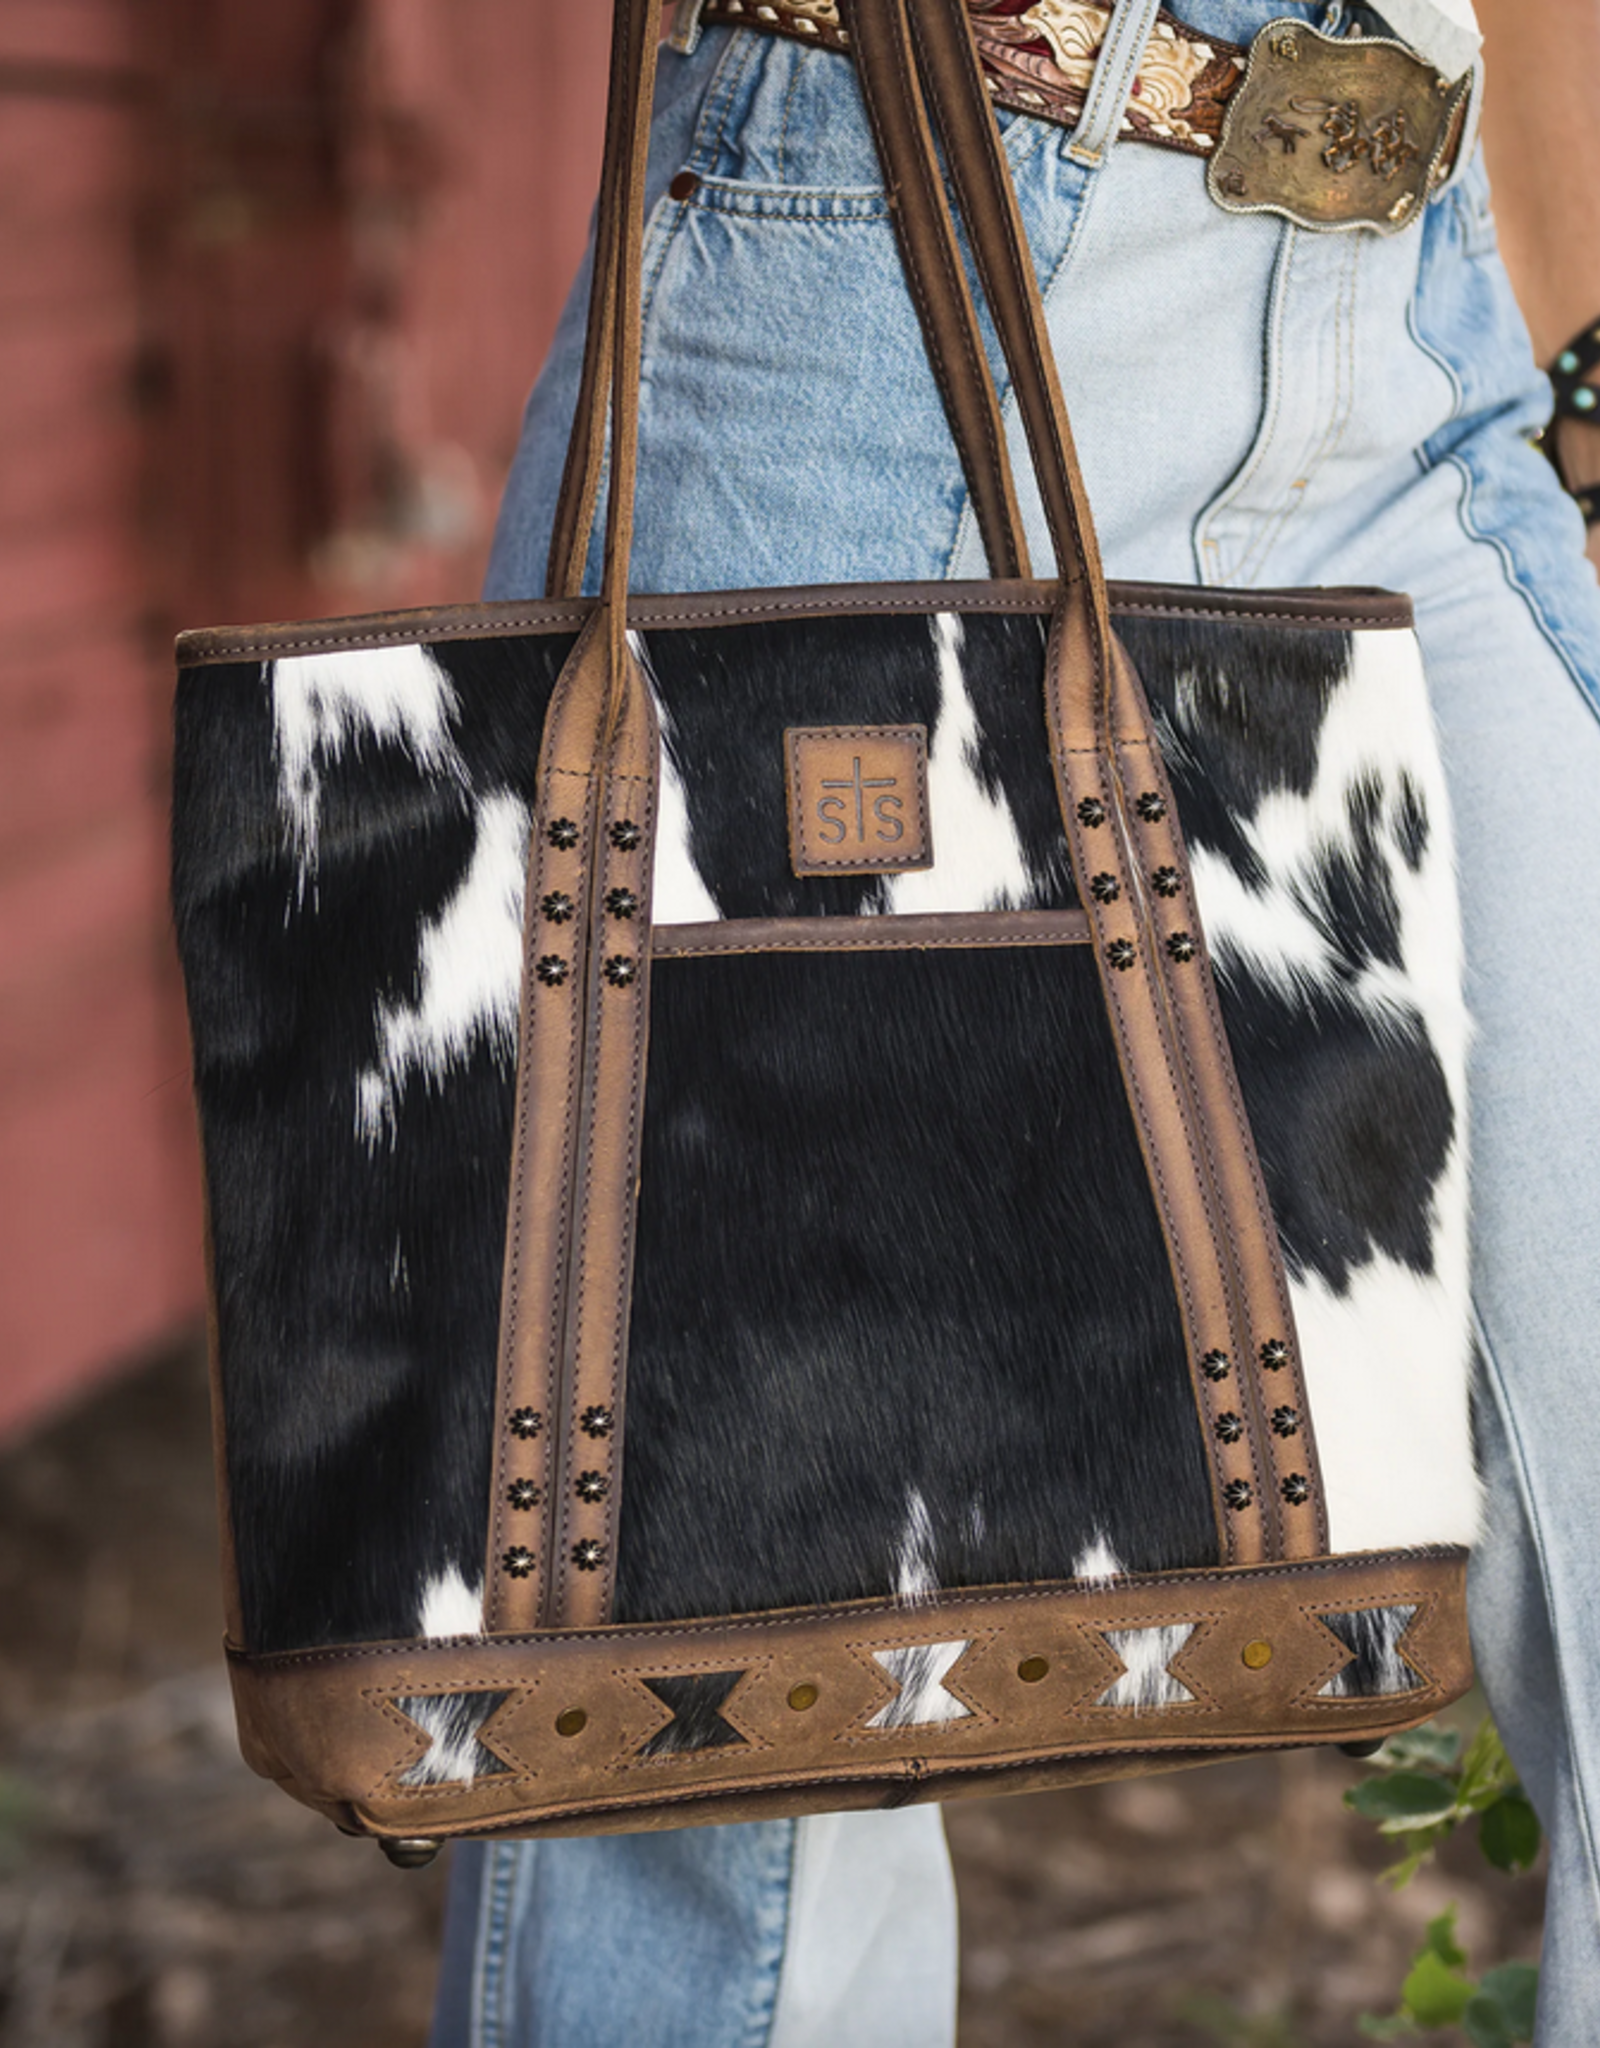 PURSE STS ROSWELL COWHIDE TOTE